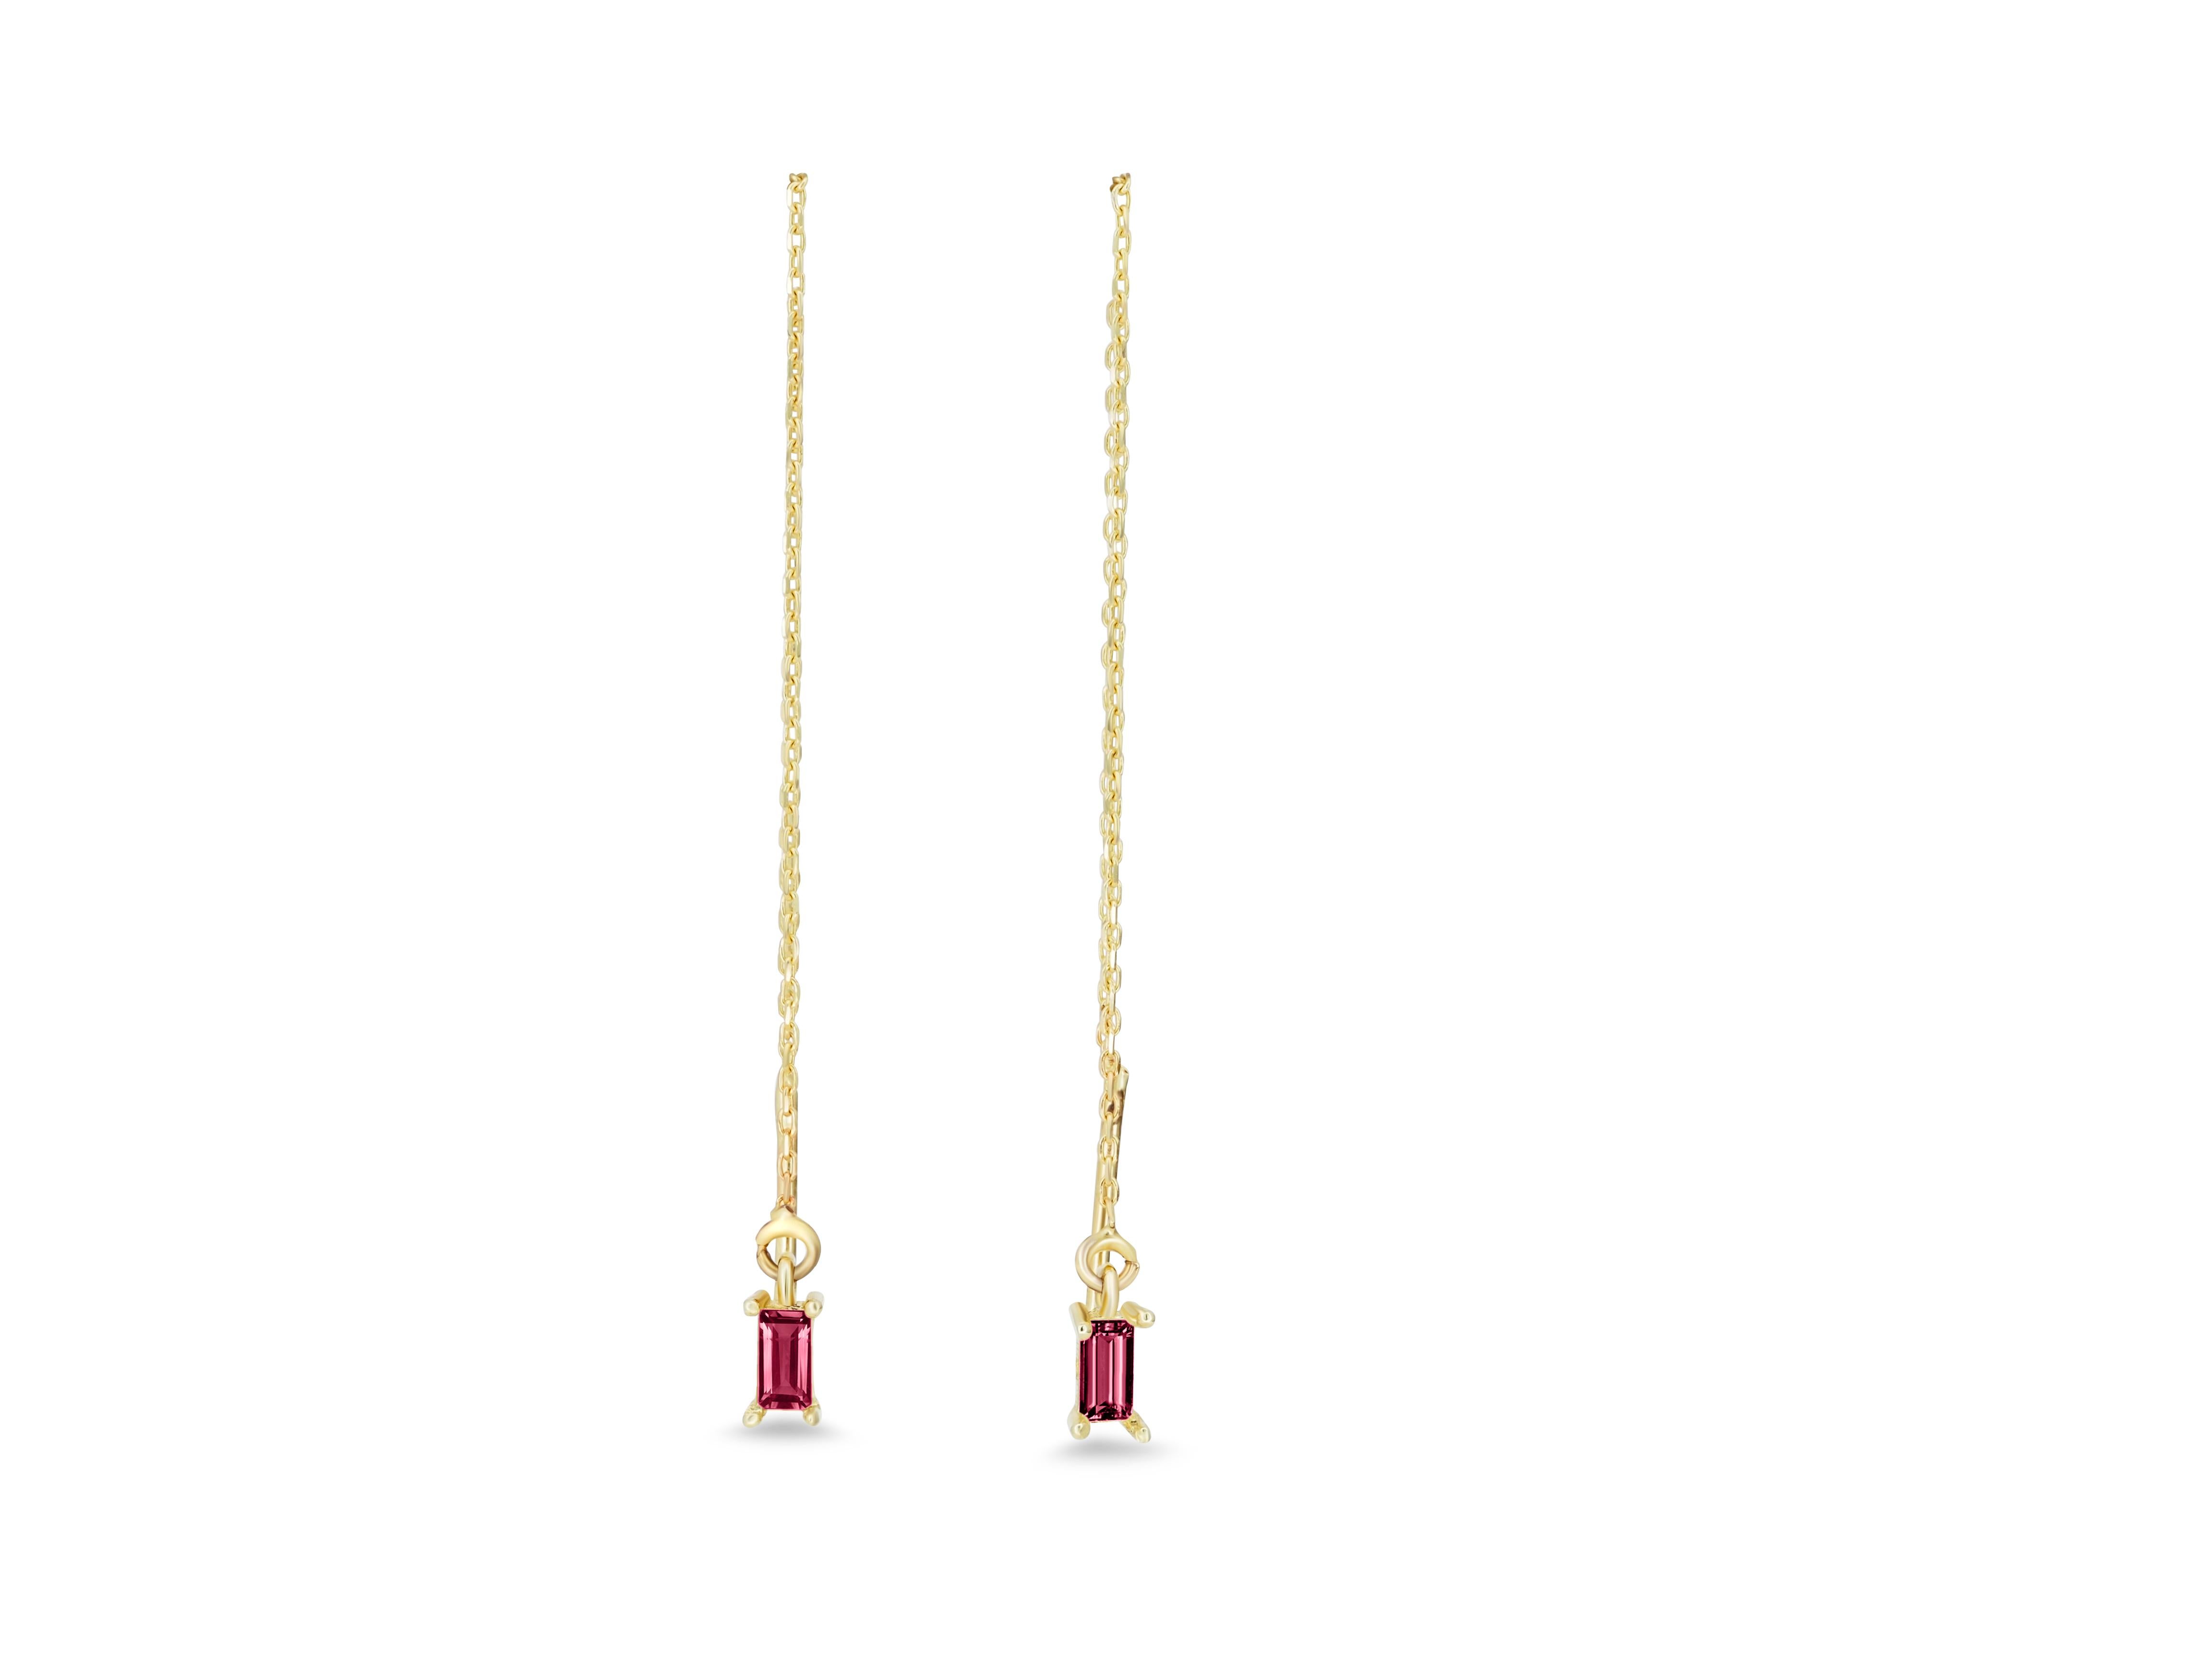 Baguette Cut 14k Solid Gold Drop Earrings with rubies.  For Sale